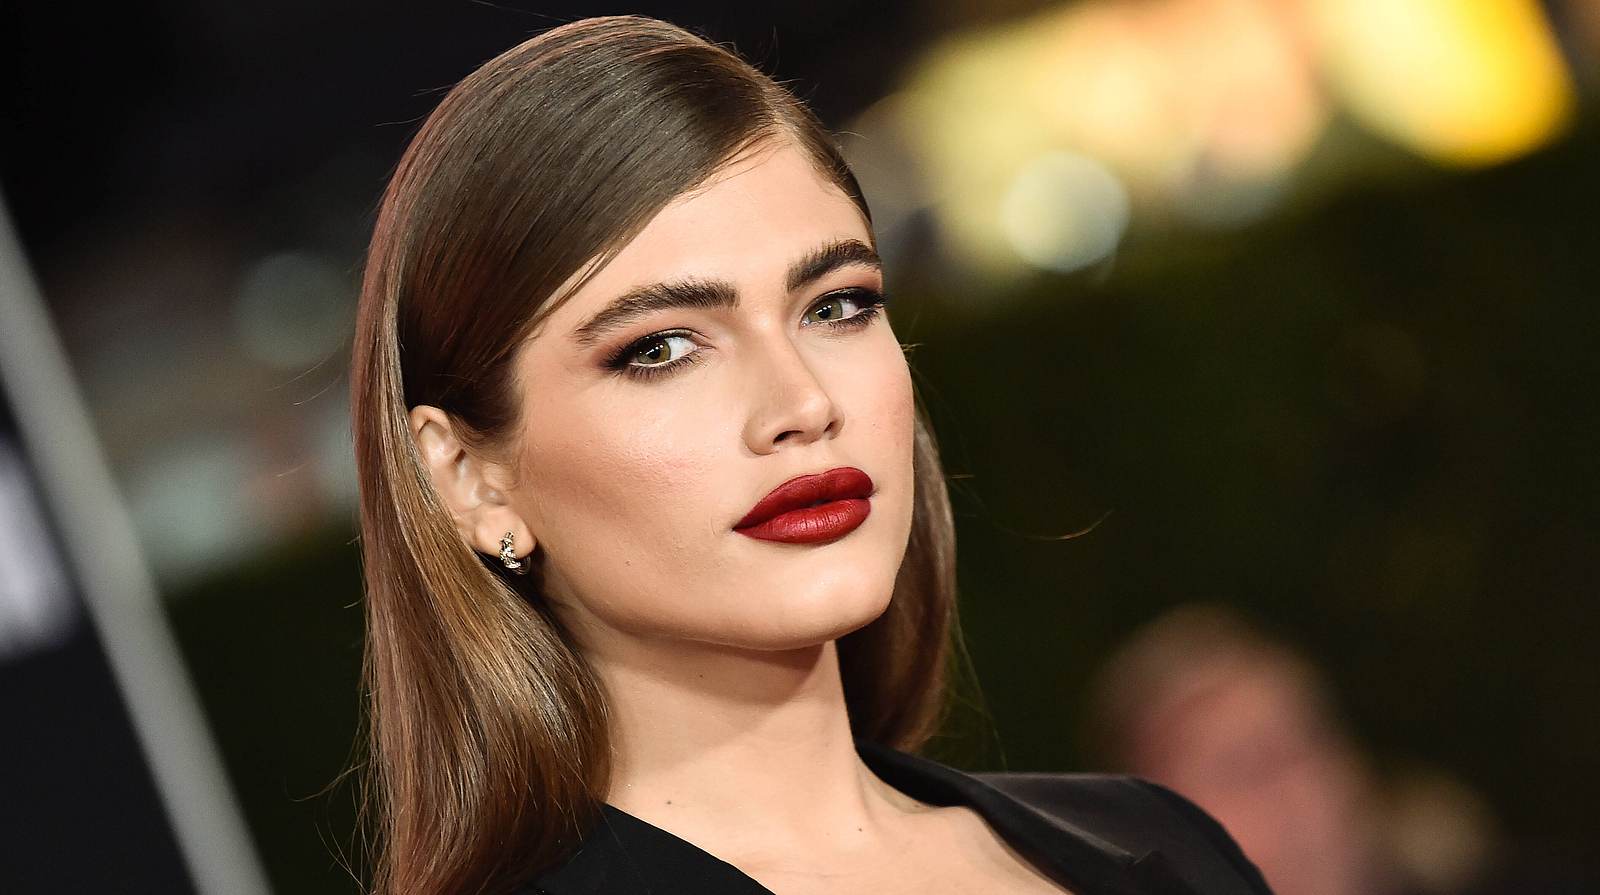 Valentina Sampaio Makes Historical Move By Becoming the 